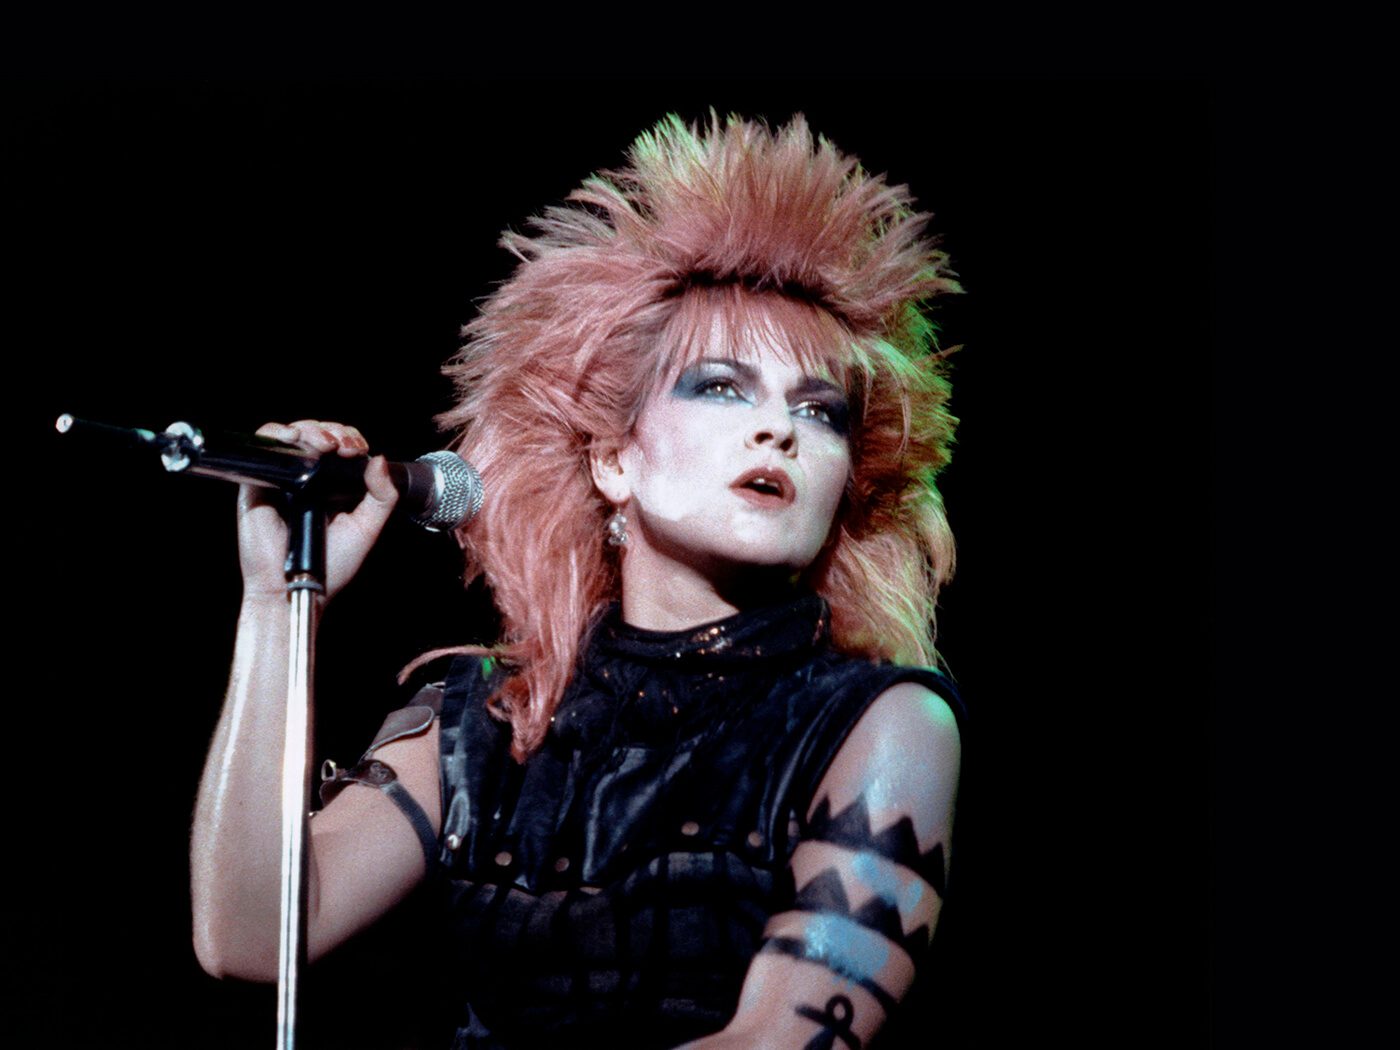 Send us your questions for Toyah Willcox